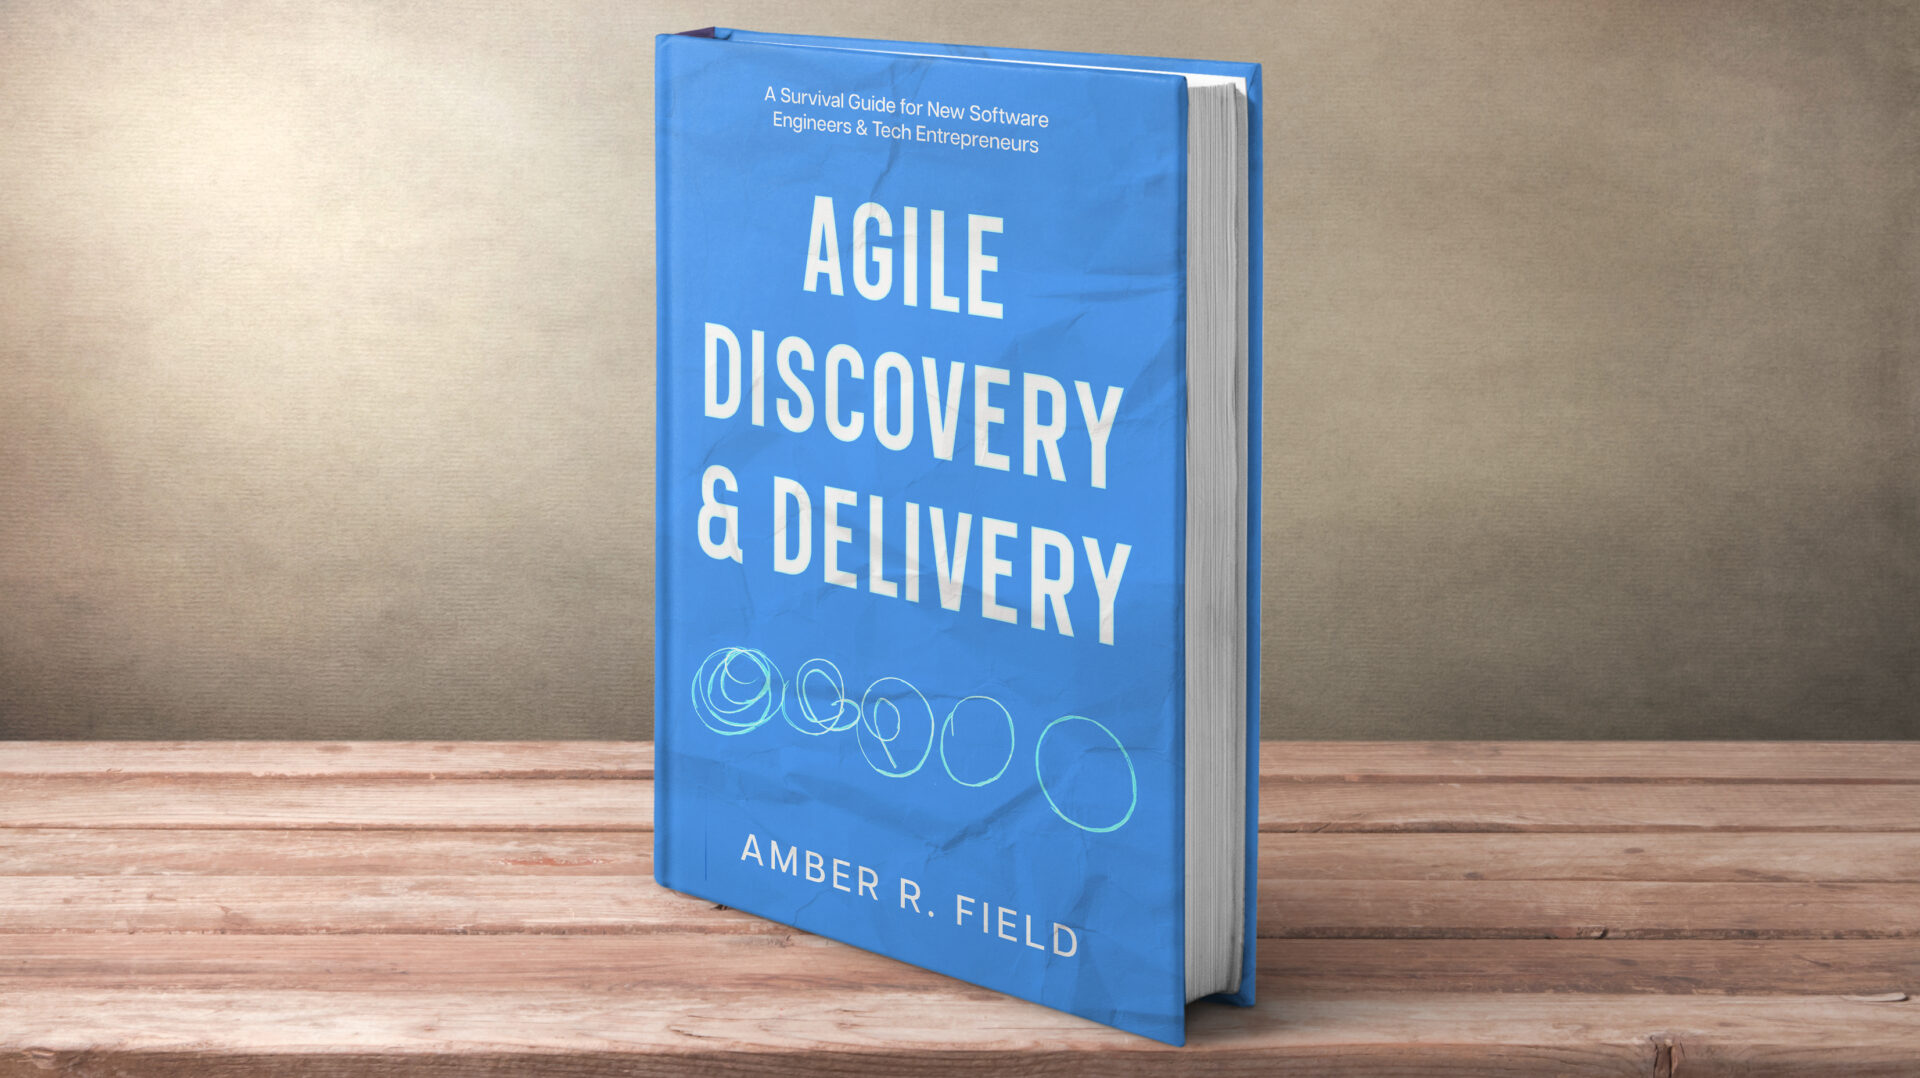 Agile Discovery & Delivery